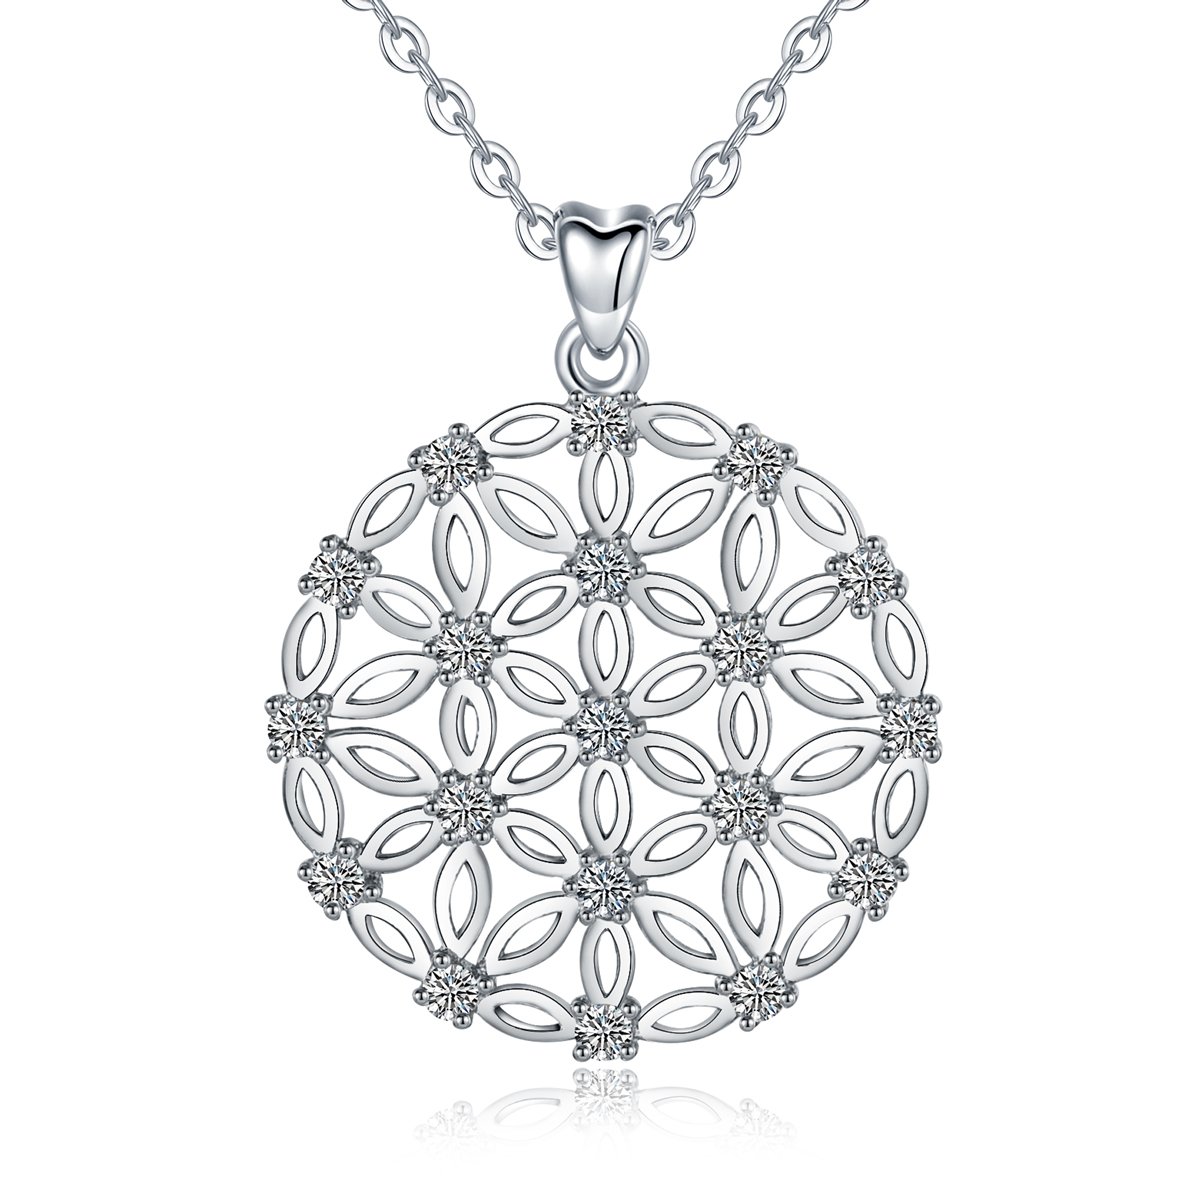 Merryshine Jewelry S925 Sterling Silver Hollow Out Flower Of Life Pendant Flowers Necklaces